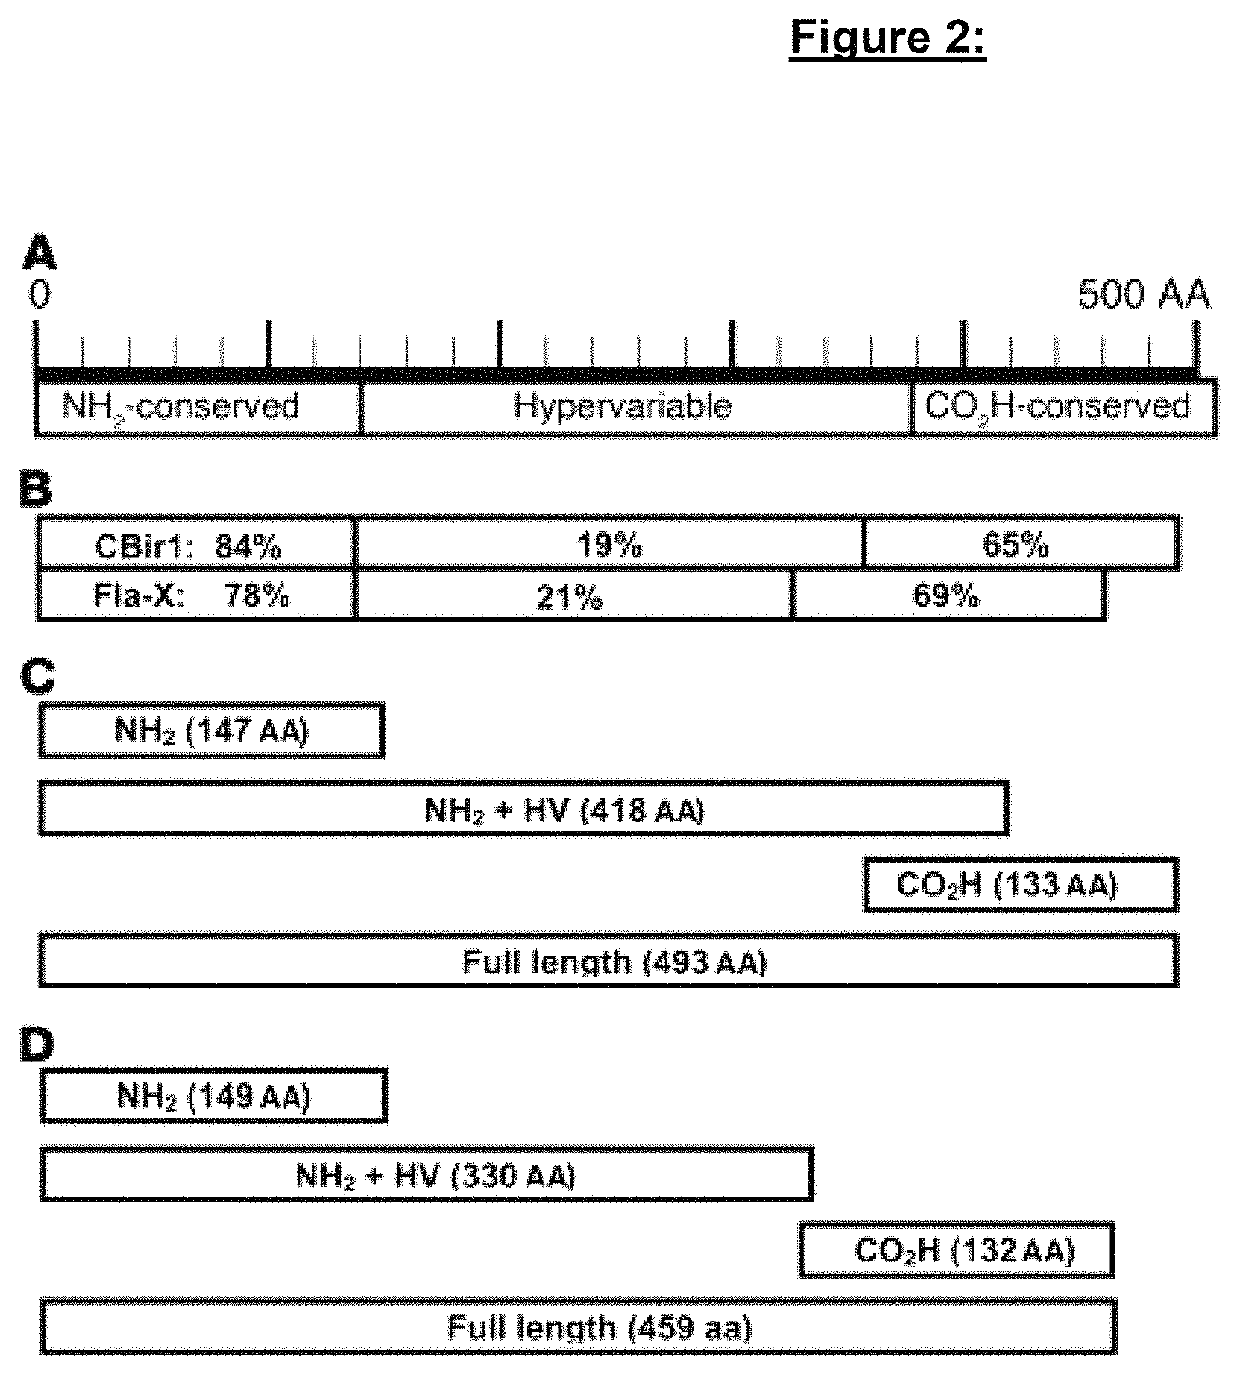 Methods of using genetic variants for the diagnosis and treatment of inflammatory bowel disease